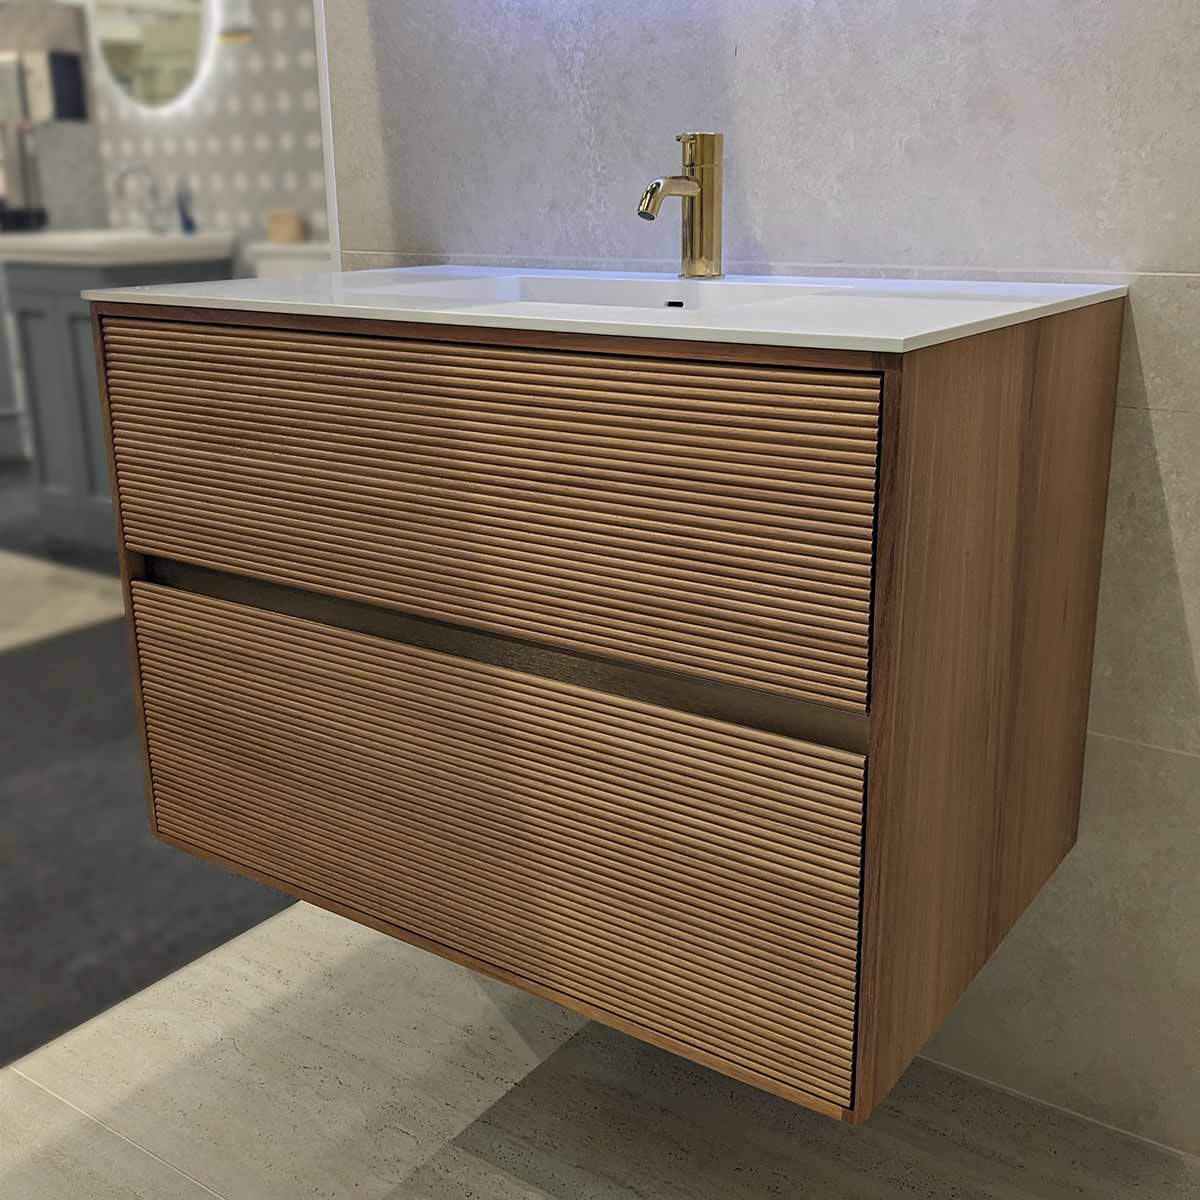 Stockholm Iroko 820 Double Drawer Wall Hung Vanity Unit With Solid Surface Washbasin